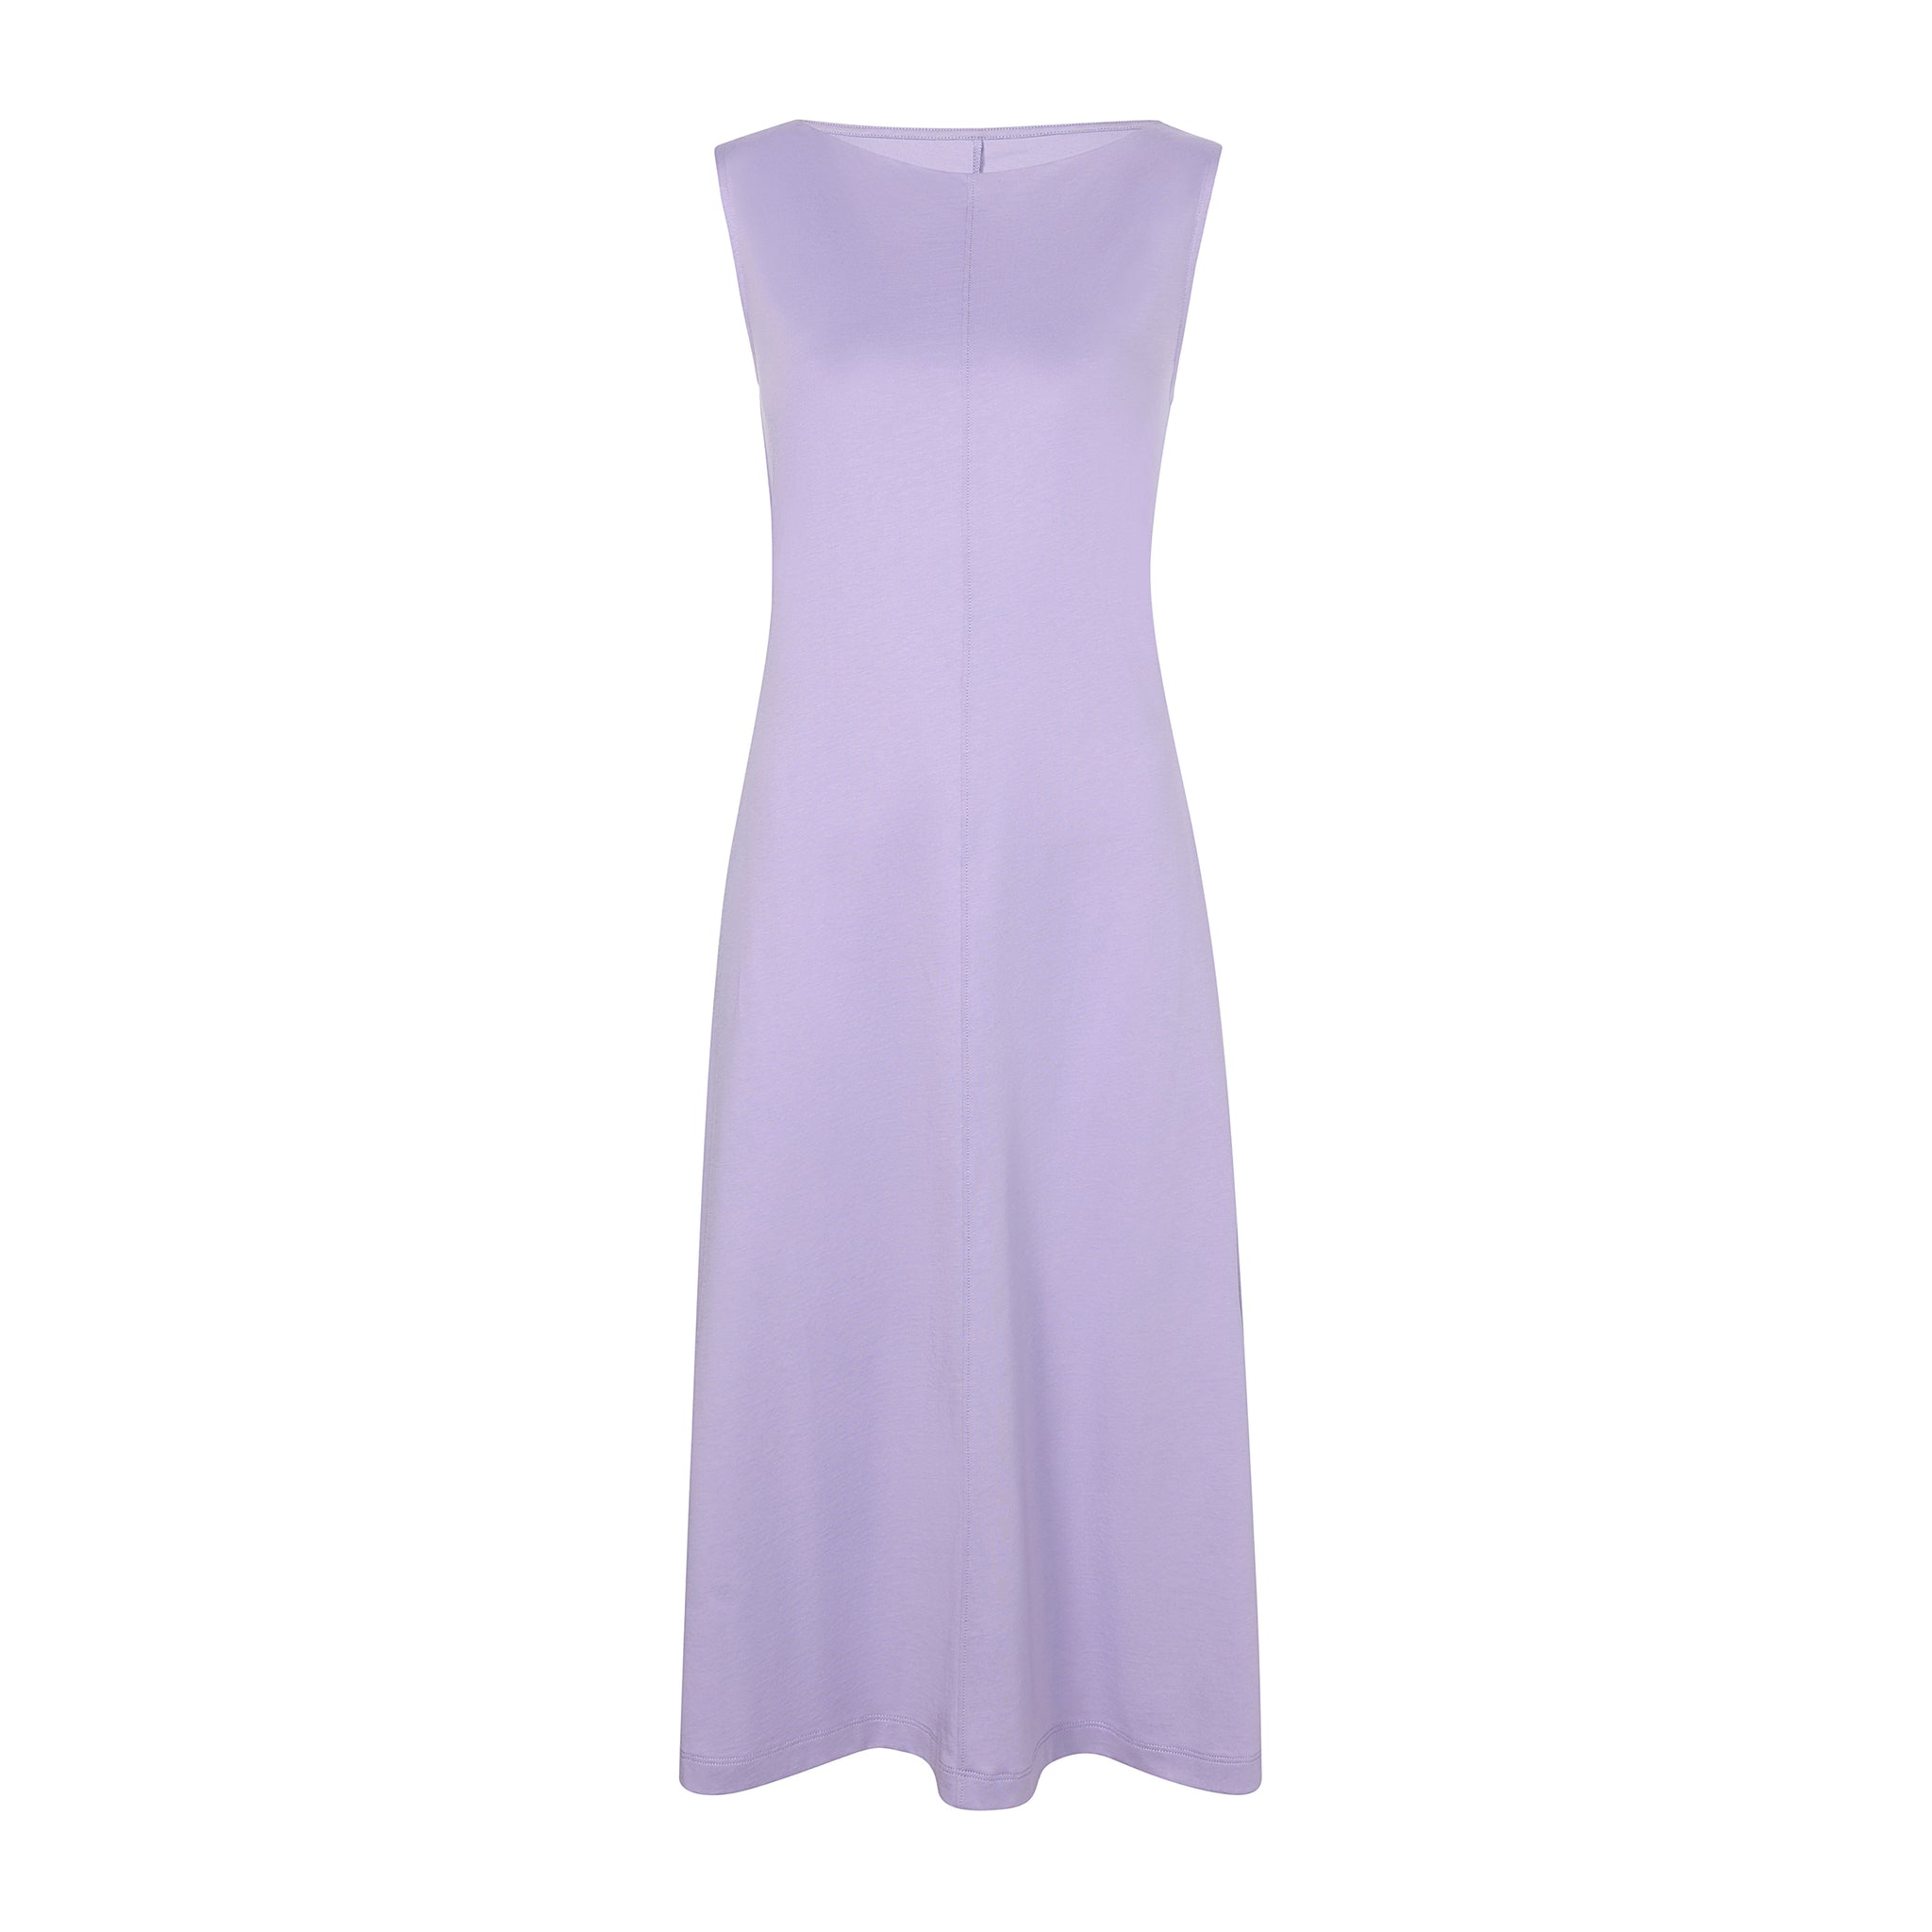 packshot image of the milano dress in light orchid